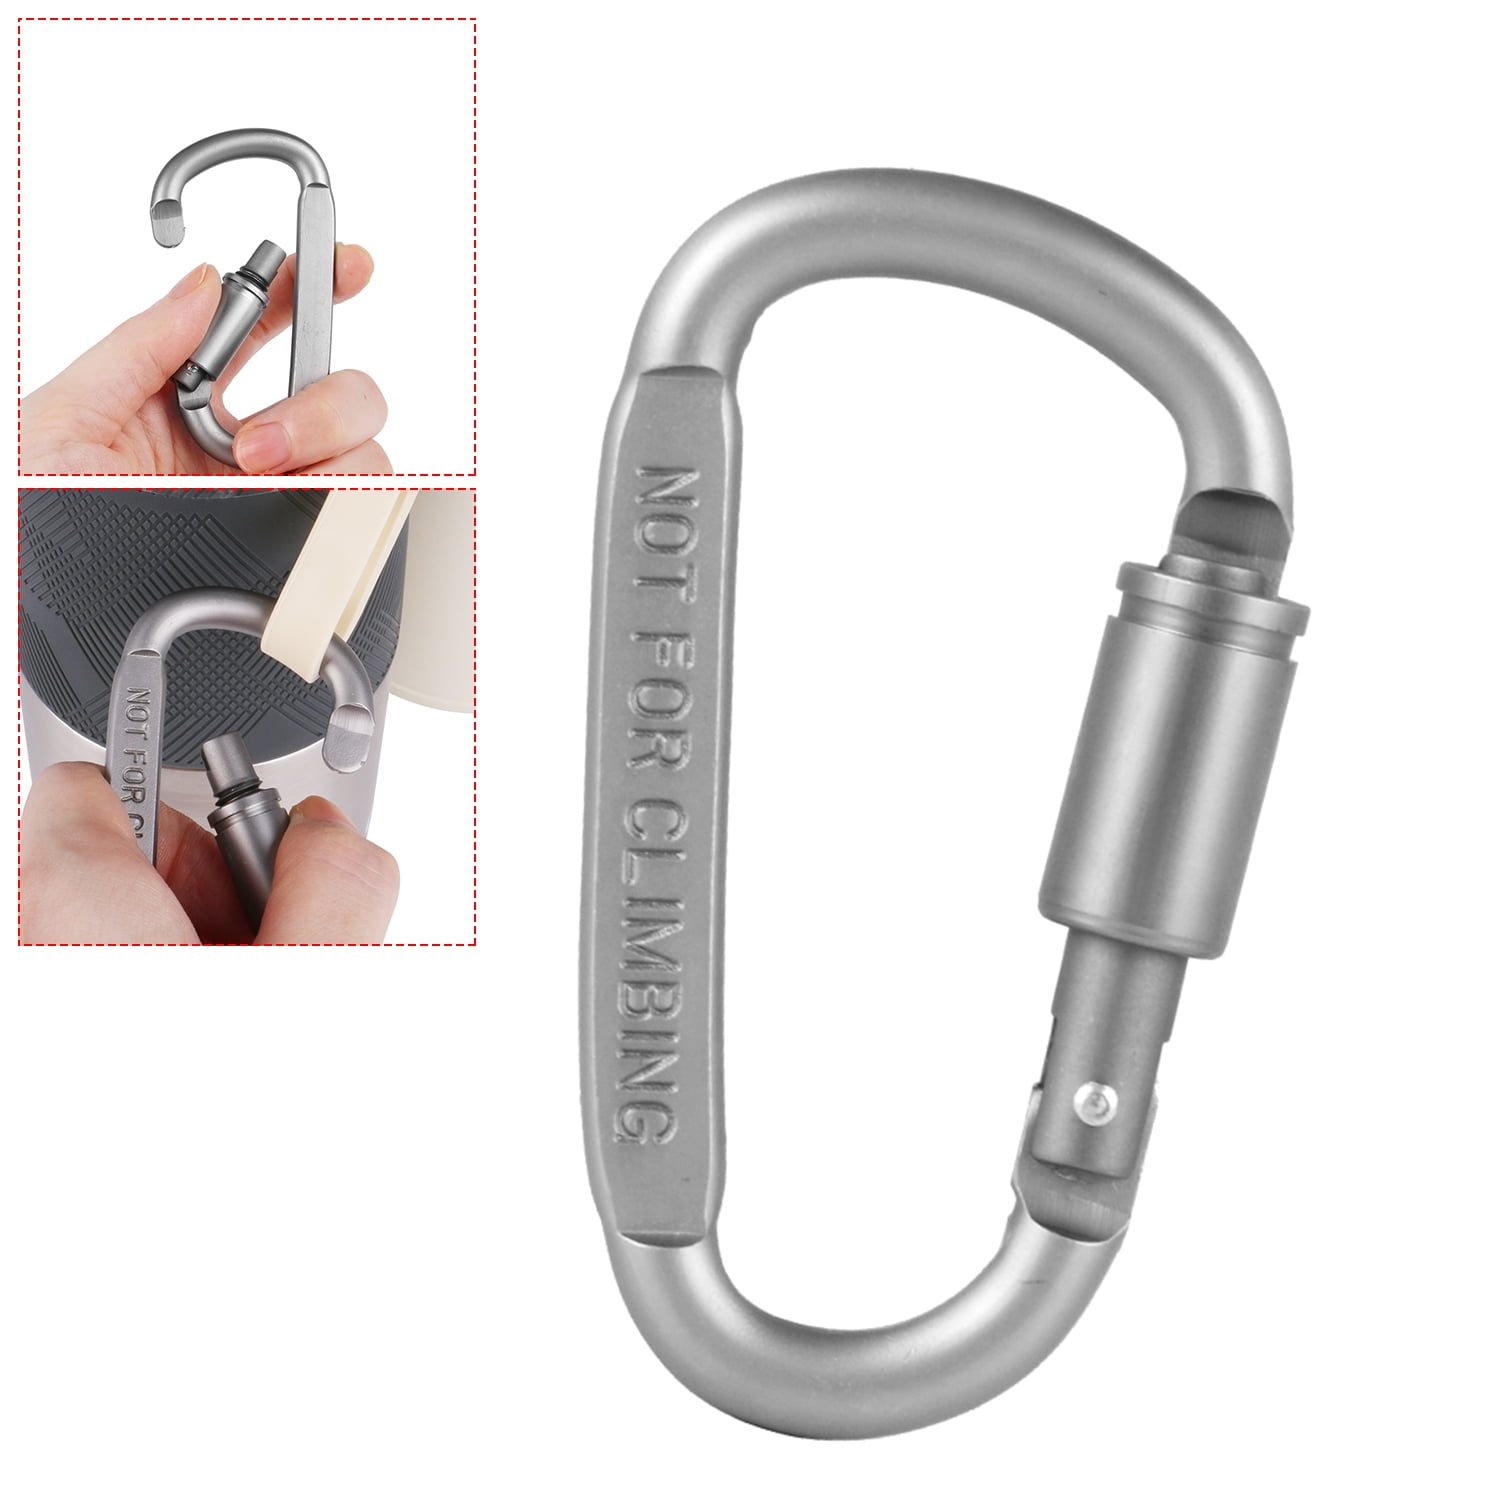 Rock Climbing Carabiner 1pc Stainless Steel D Ring Lock Buckle Snap Clip Sports 